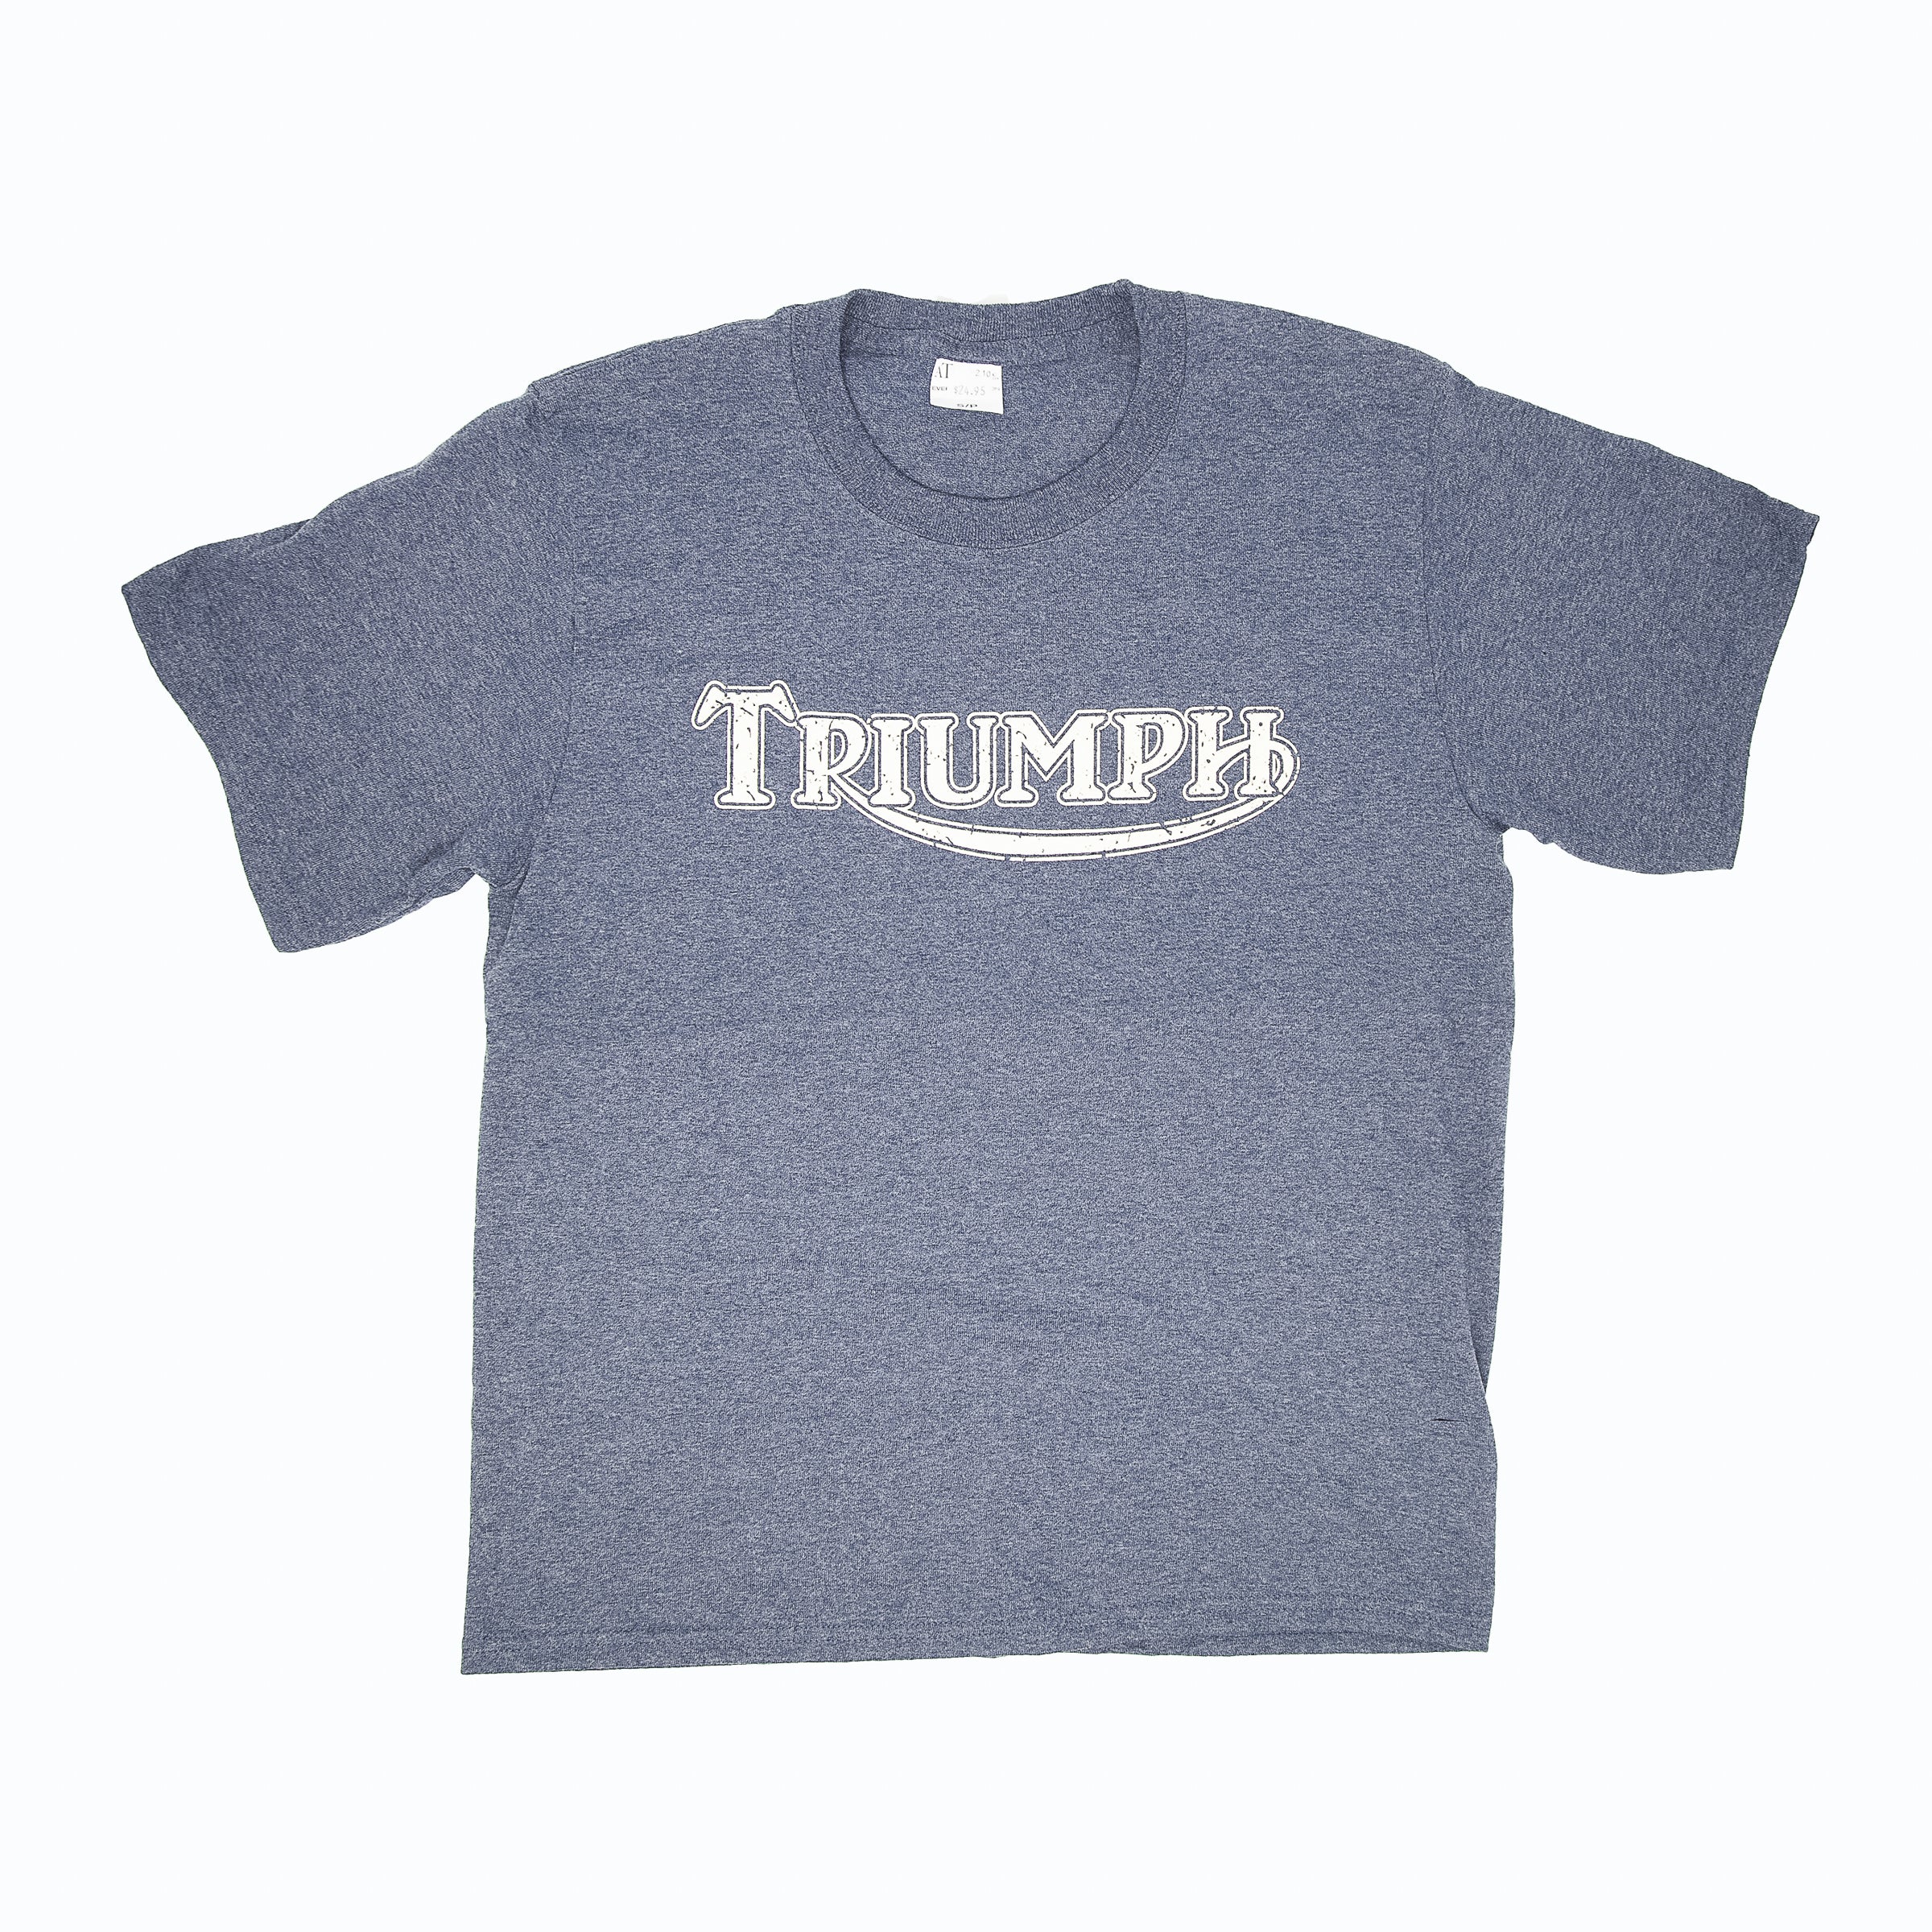 Dreamcycle Motorcycle Museum |   Triumph Tshirt on white bacground.